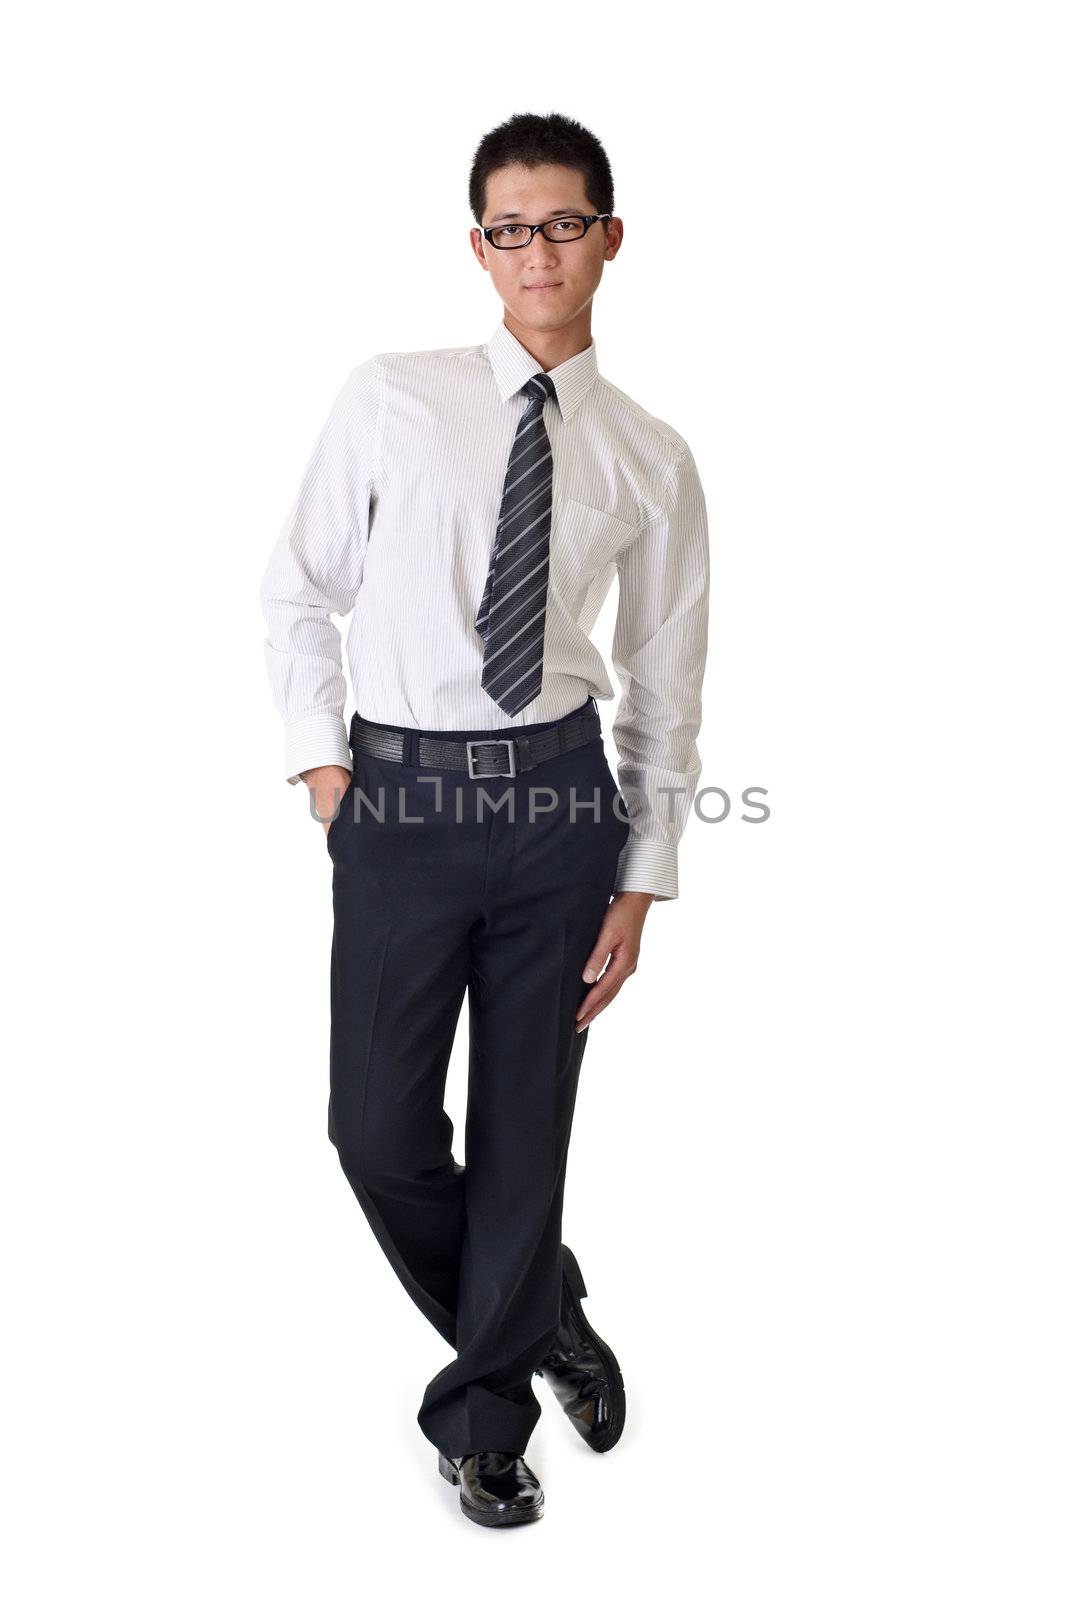 Smart young business man, full length portrait of Asian isolated on white background.